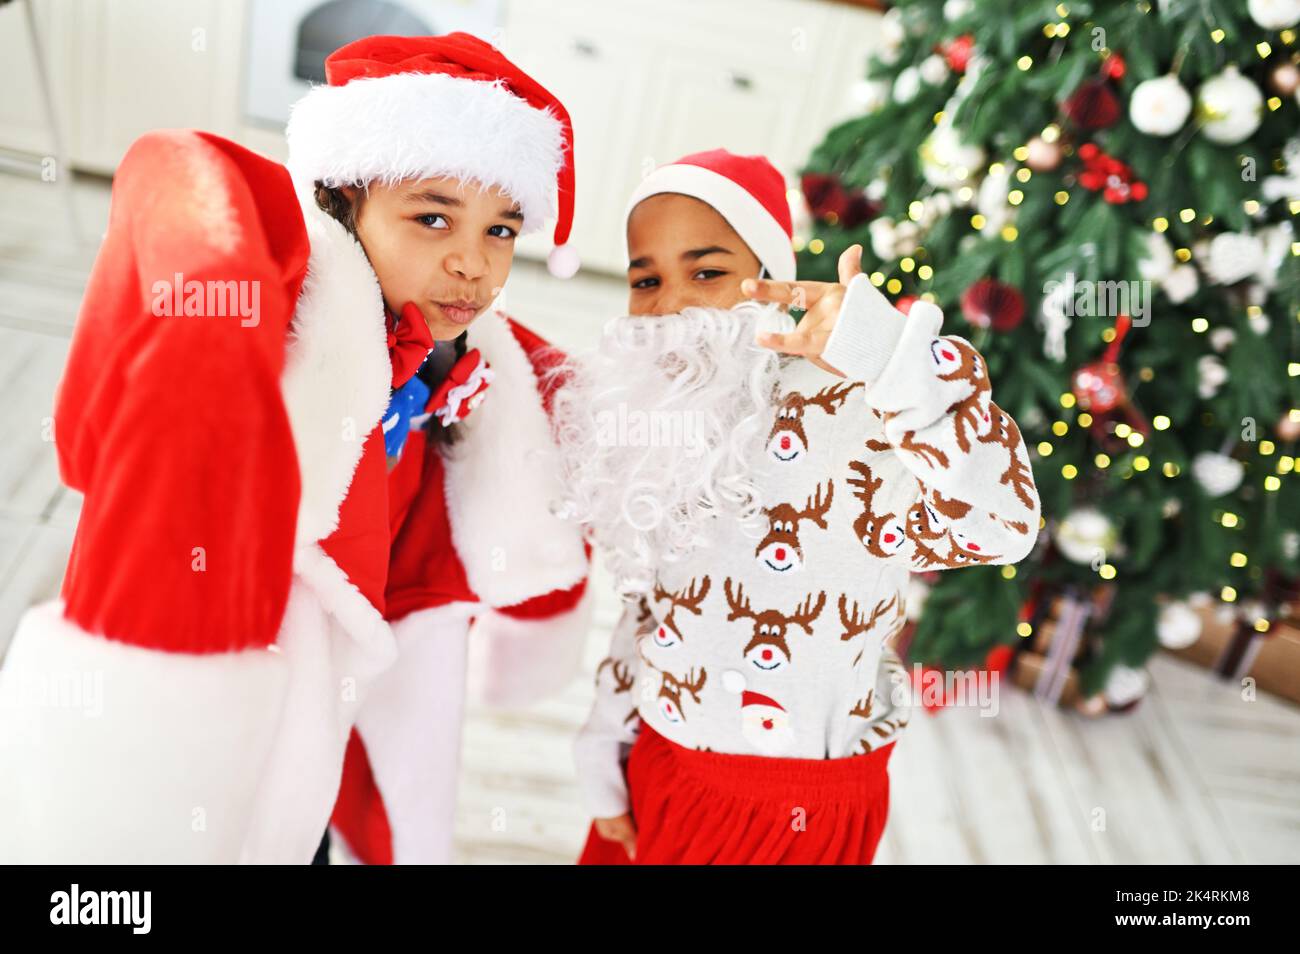 children - brother and sister in a large size santa costume with a false beard play and grimace against the backdrop of the Christmas tree. Stock Photo